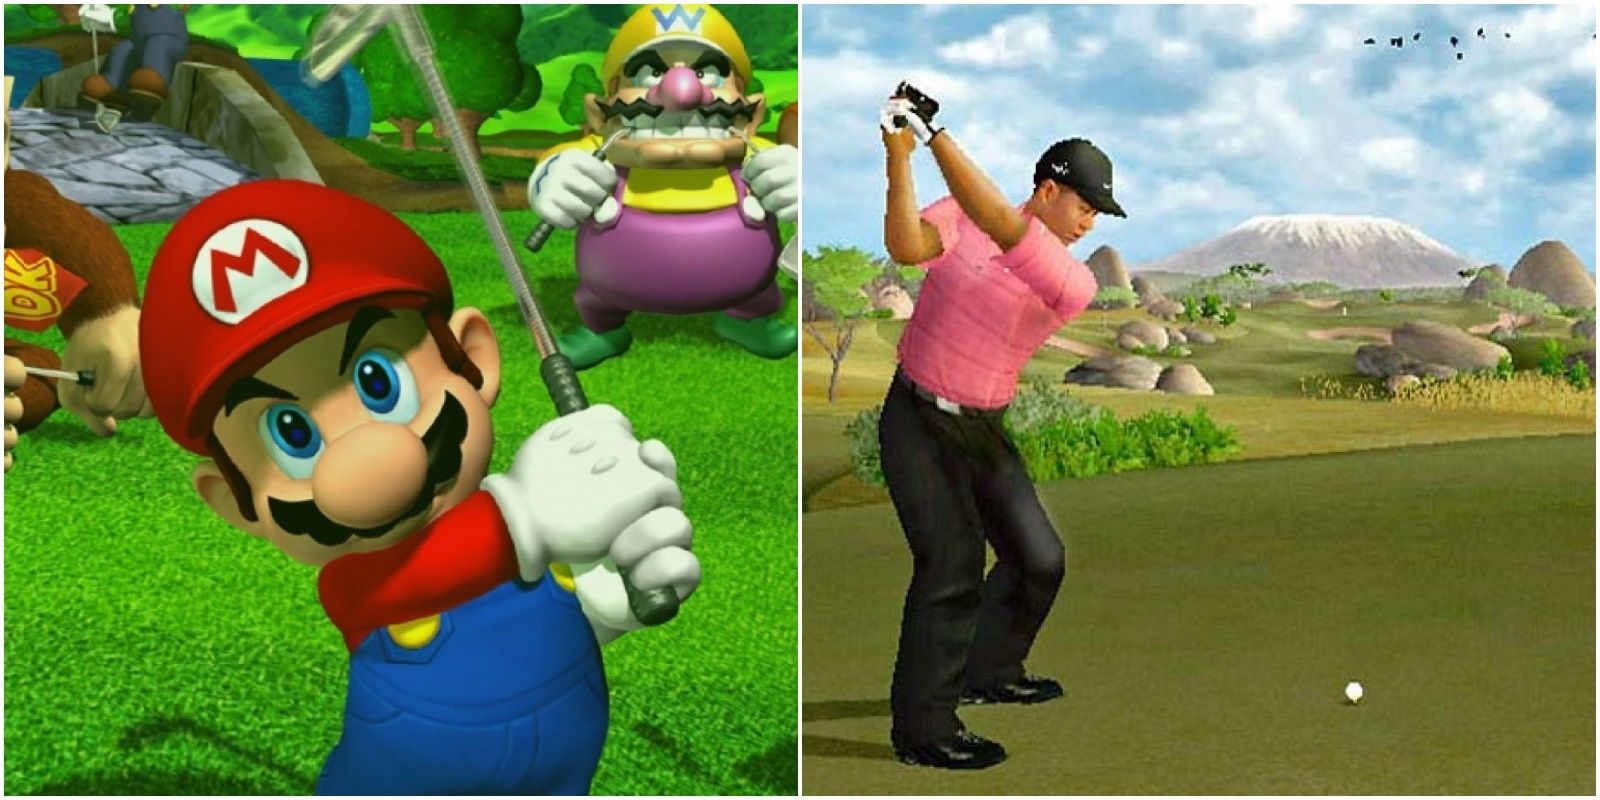 Mario and Tiger Woods